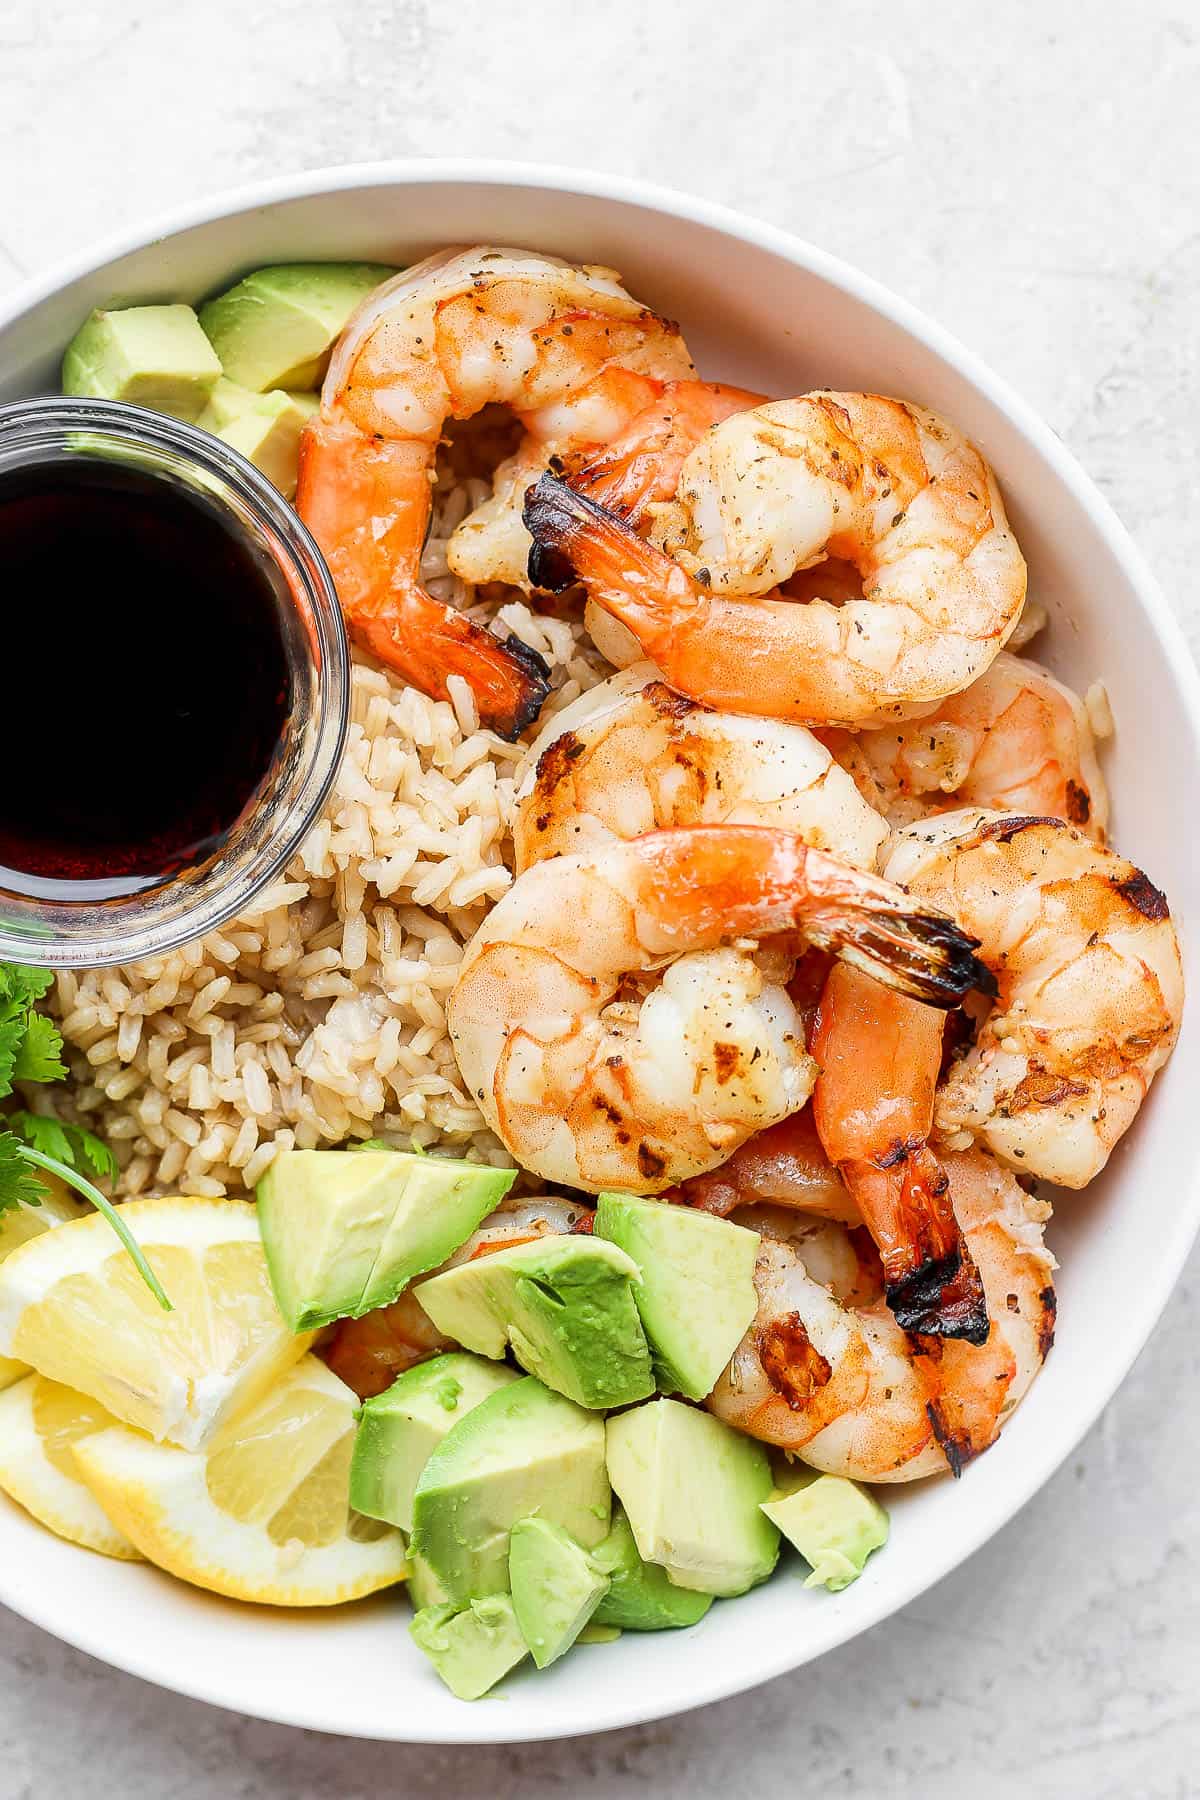 Pan fried shrimp in a bowl with rice, avocado, and a dish of soy sauce.